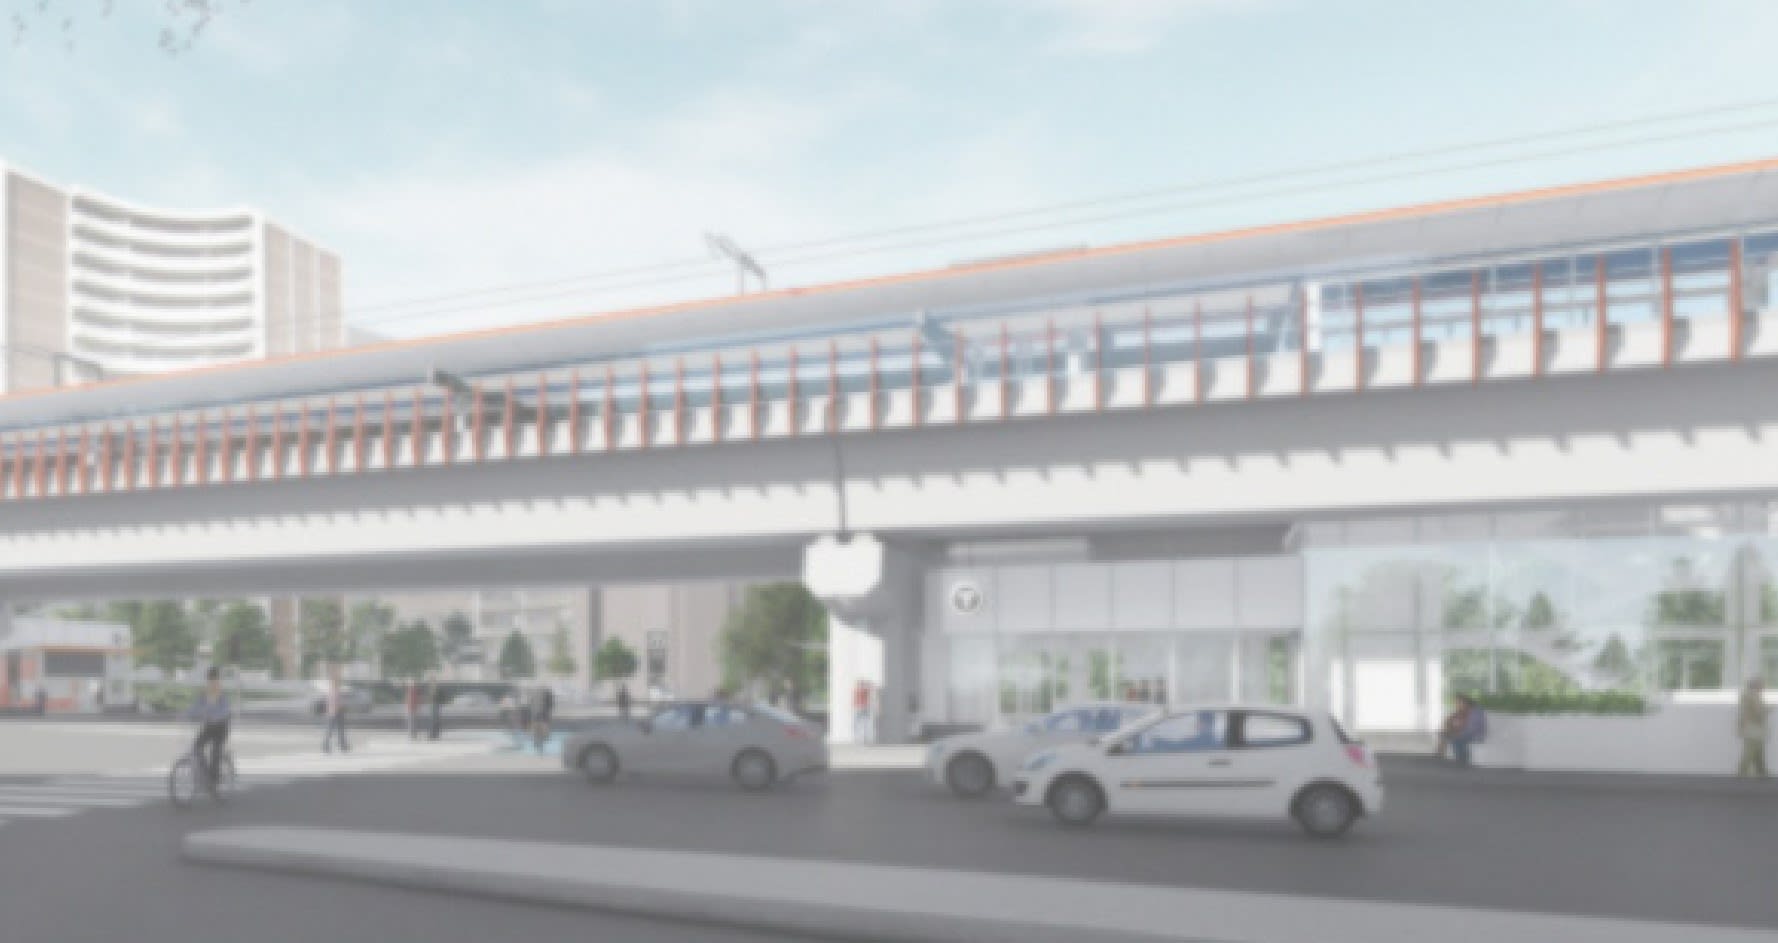 A rendering of early concept designs for Scarlett-Eglinton Station